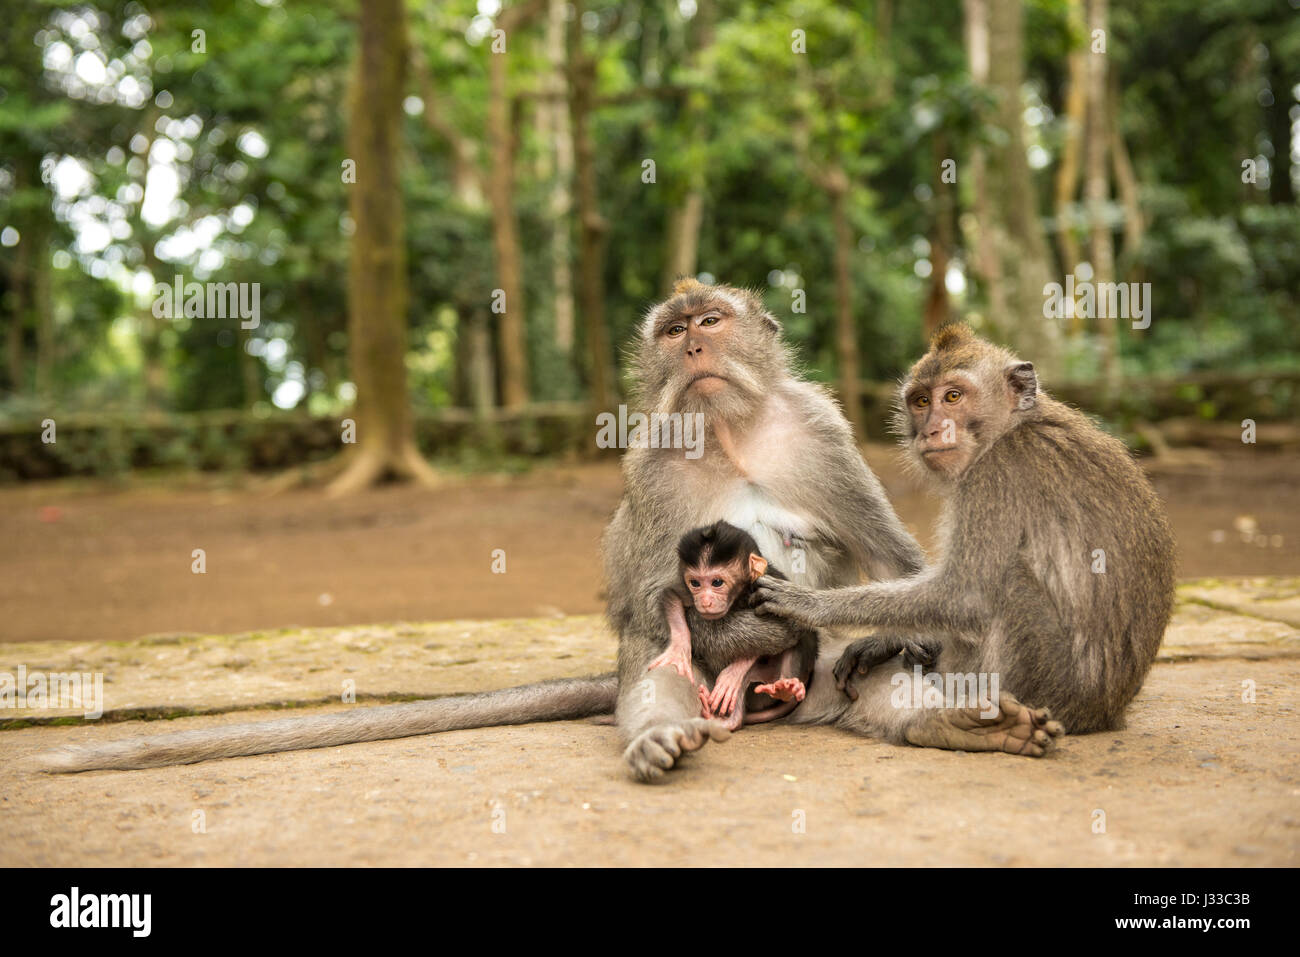 Monkey family Cynomolgus monkey Macaca fascicularis with child, during grooming in the city temples of Ubud, Bali, Indonesia Stock Photo